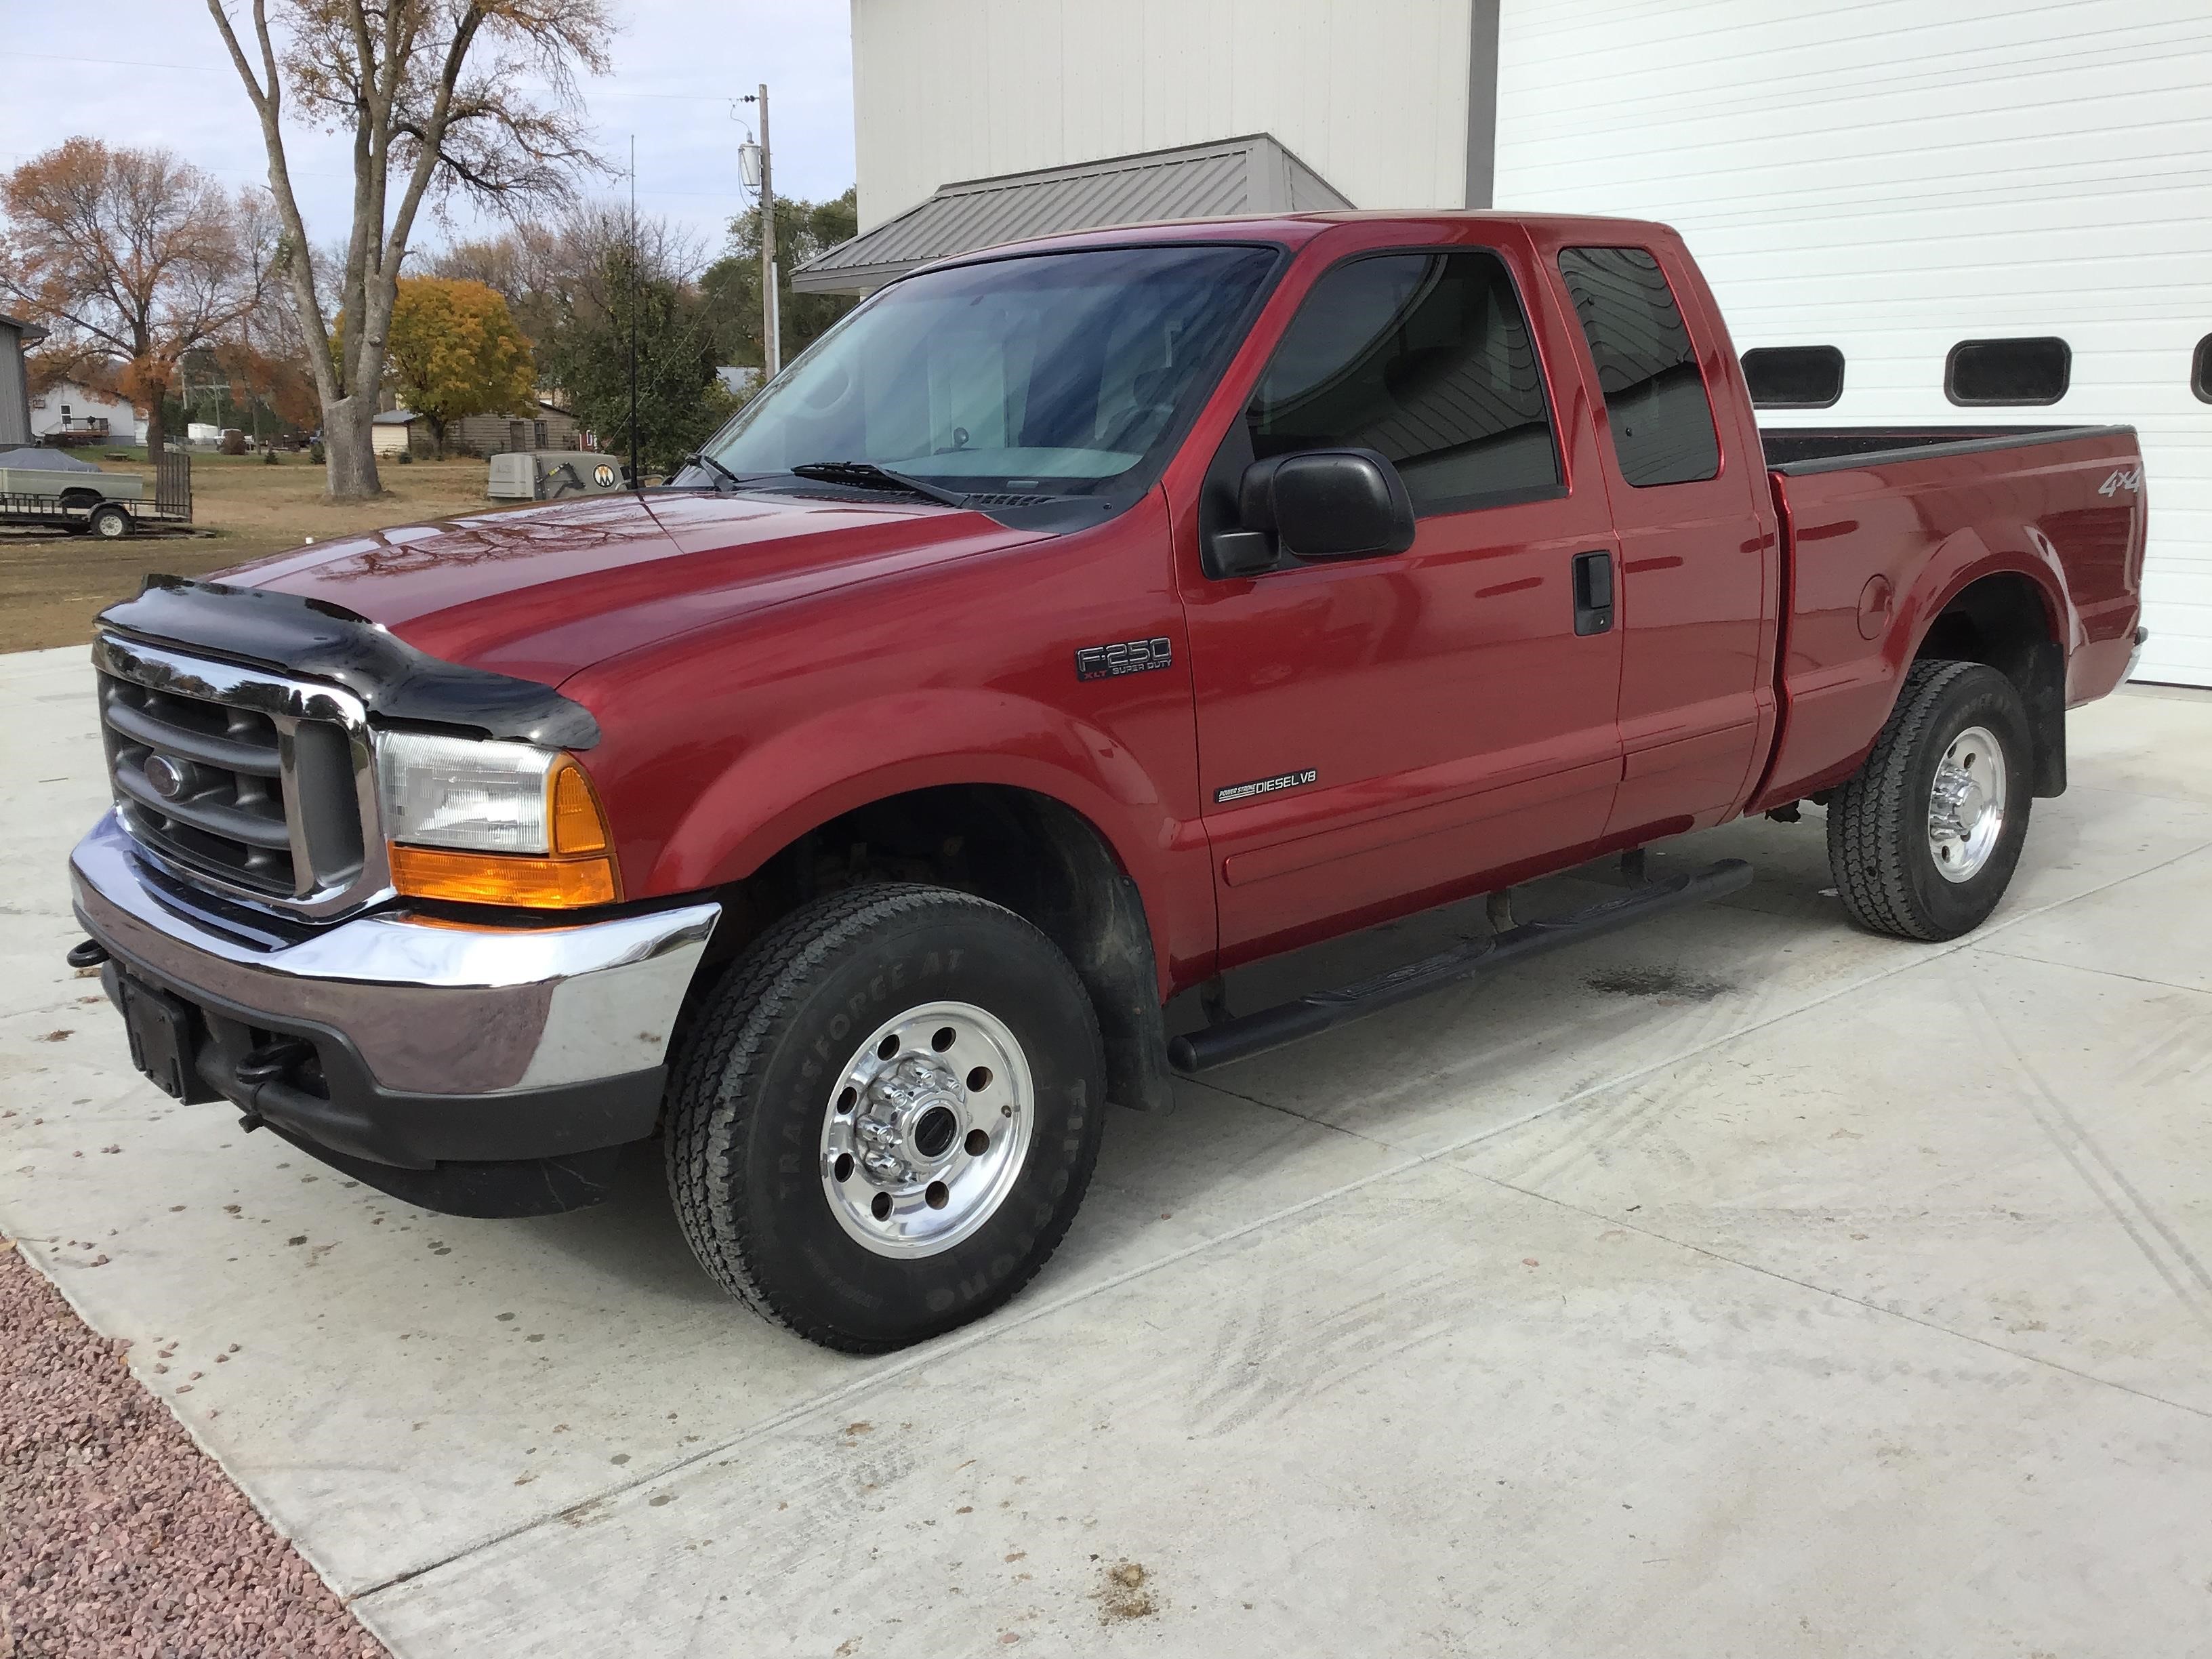 2001 Ford F250 Super Duty 4x4 Extended Cab Pickup BigIron Auctions